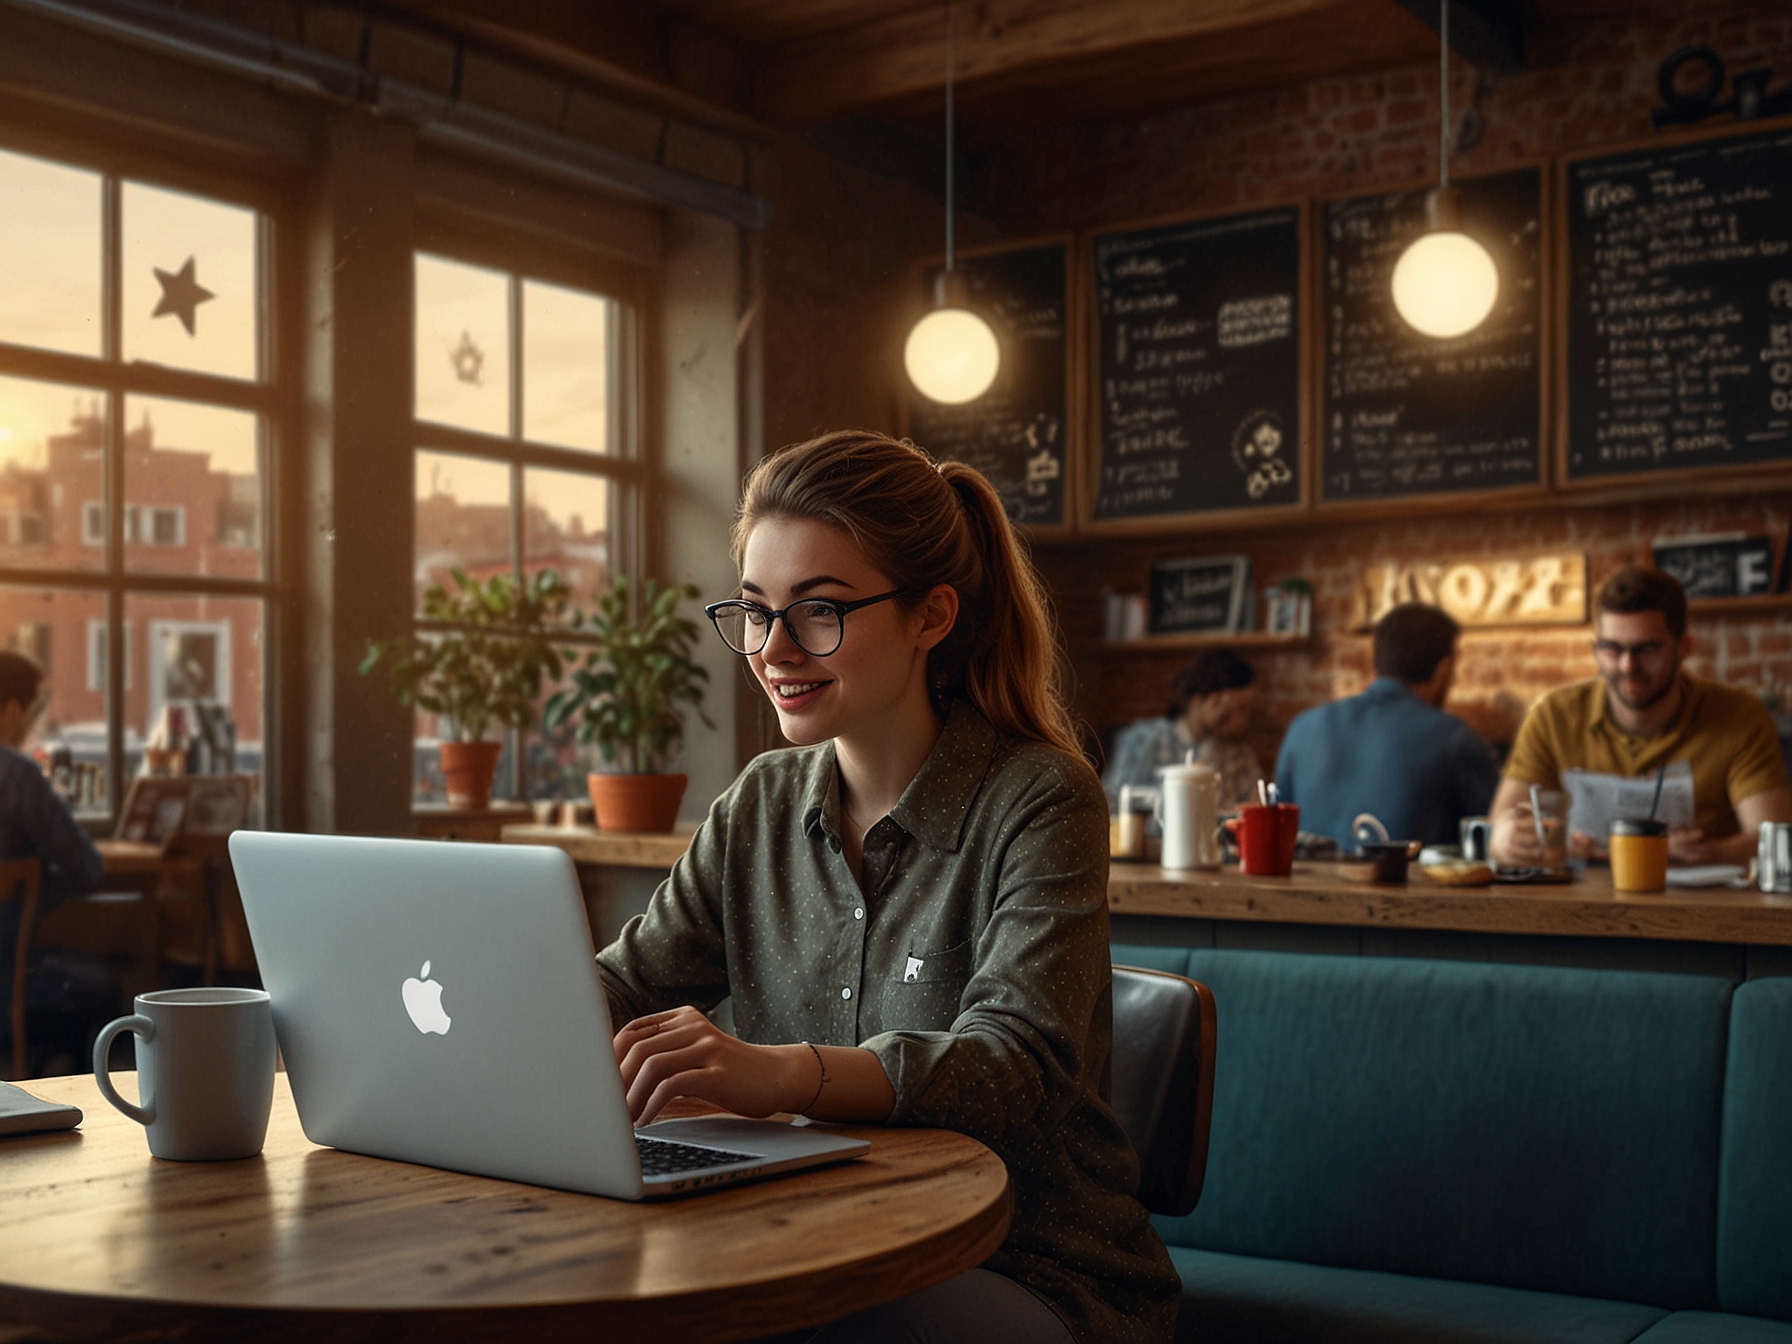 A Millennial is seen typing a detailed review on a laptop in a cozy café. The screen shows a review site with star ratings and a comment section, highlighting their digital-savviness.